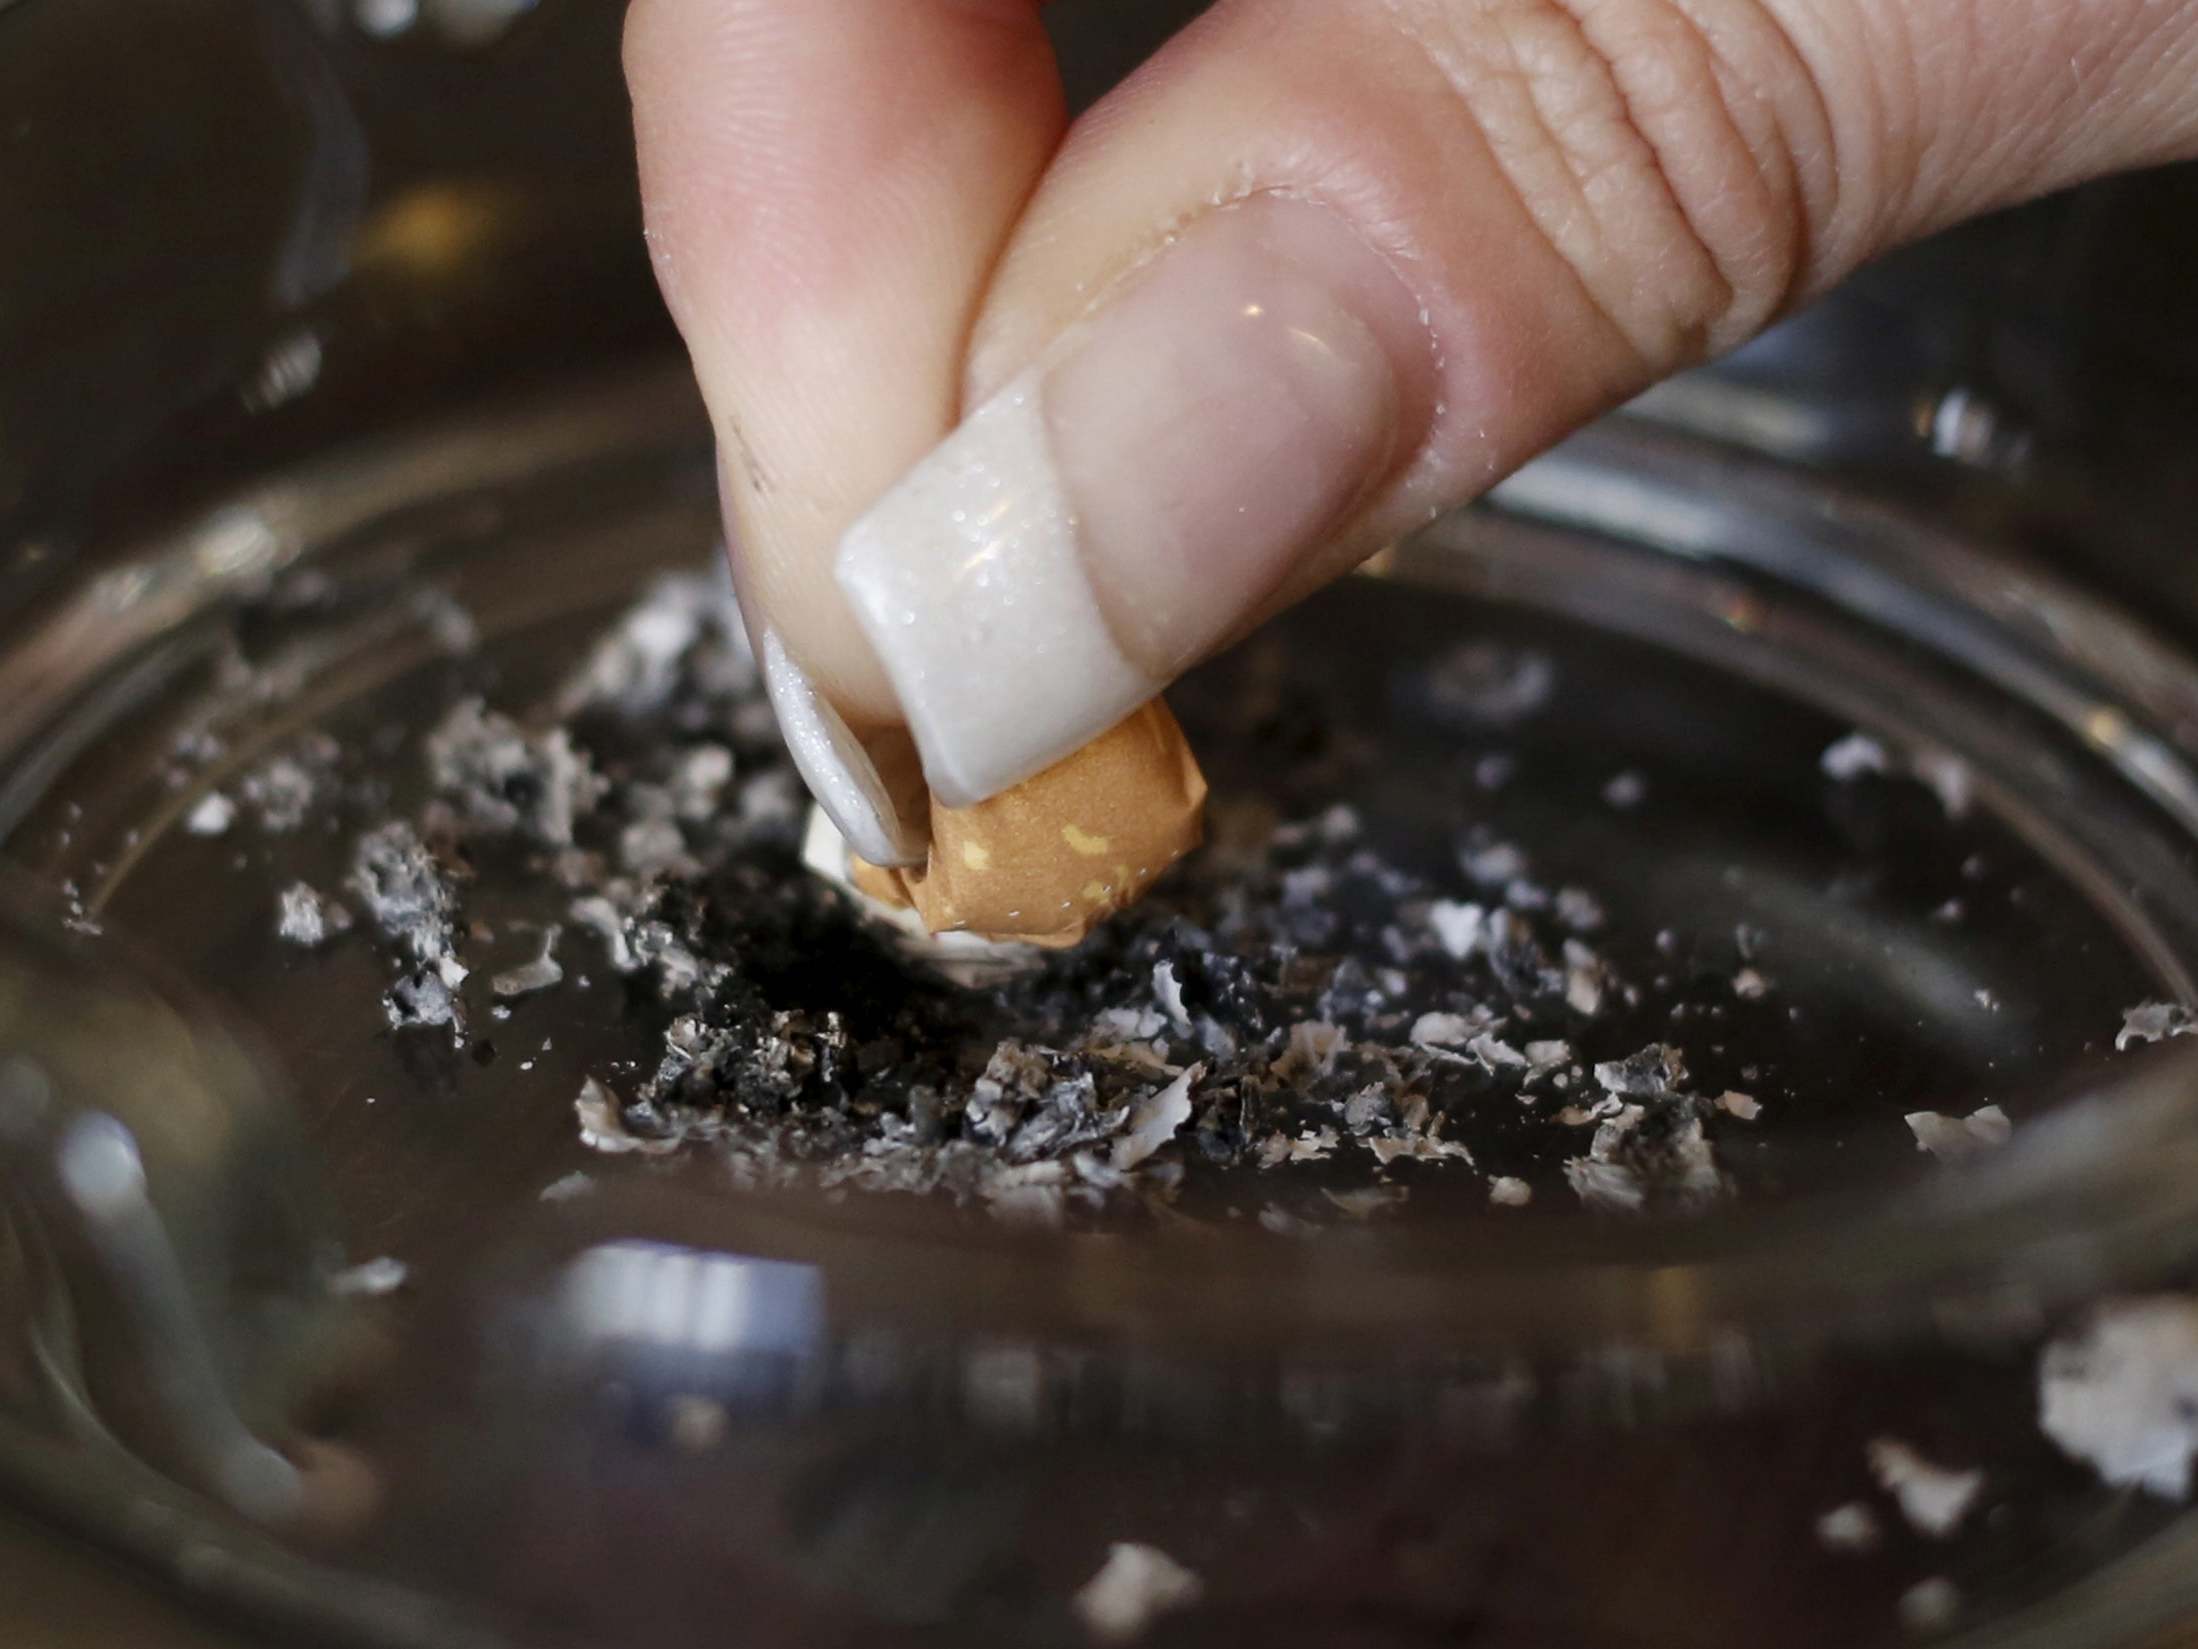 A woman stubs out a cigarette in an ashtray in a cafe